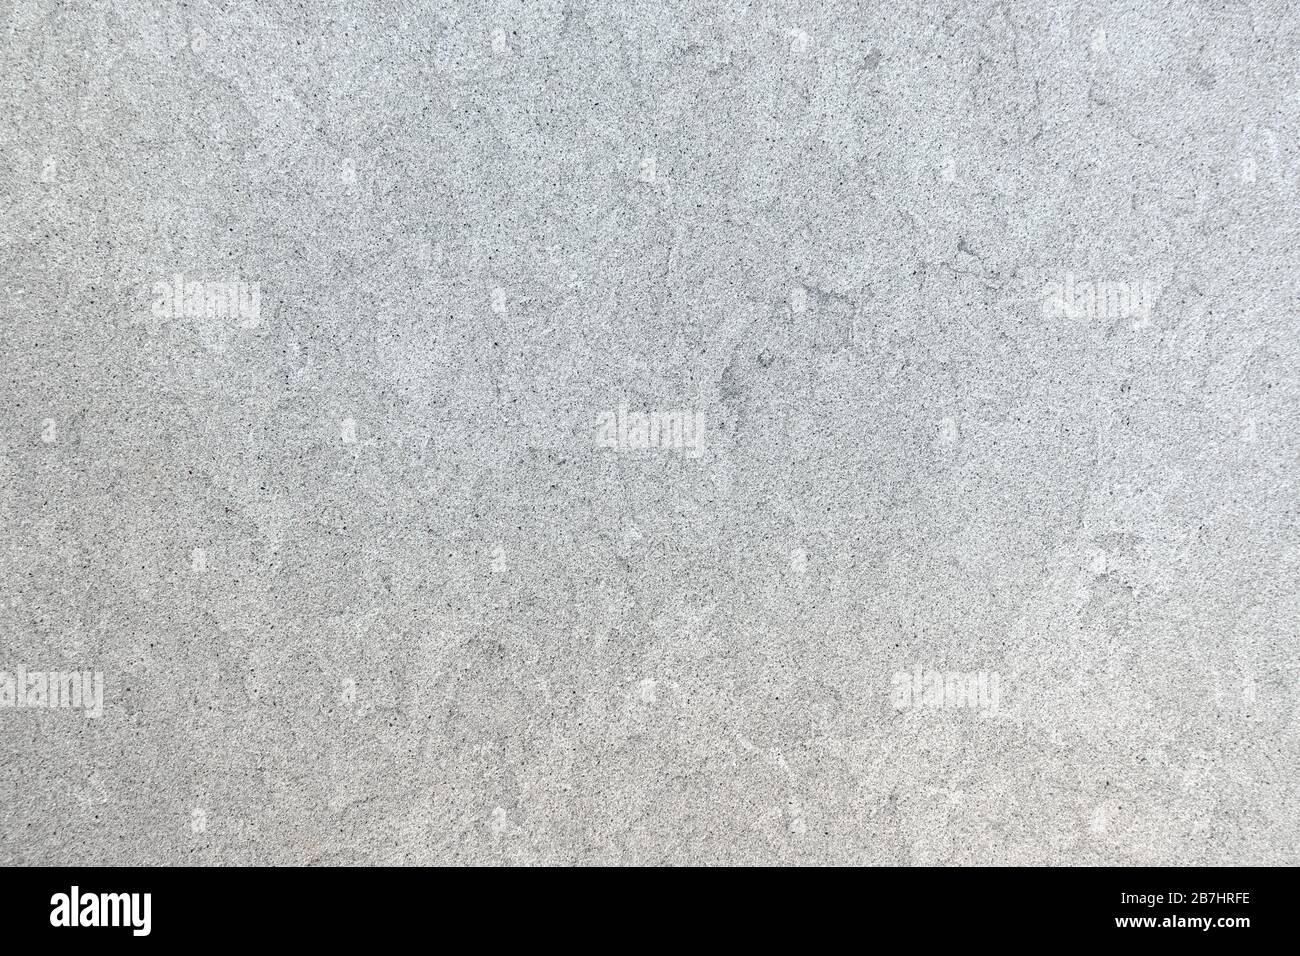 Marbled pattern of a light gray stone slab Stock Photo